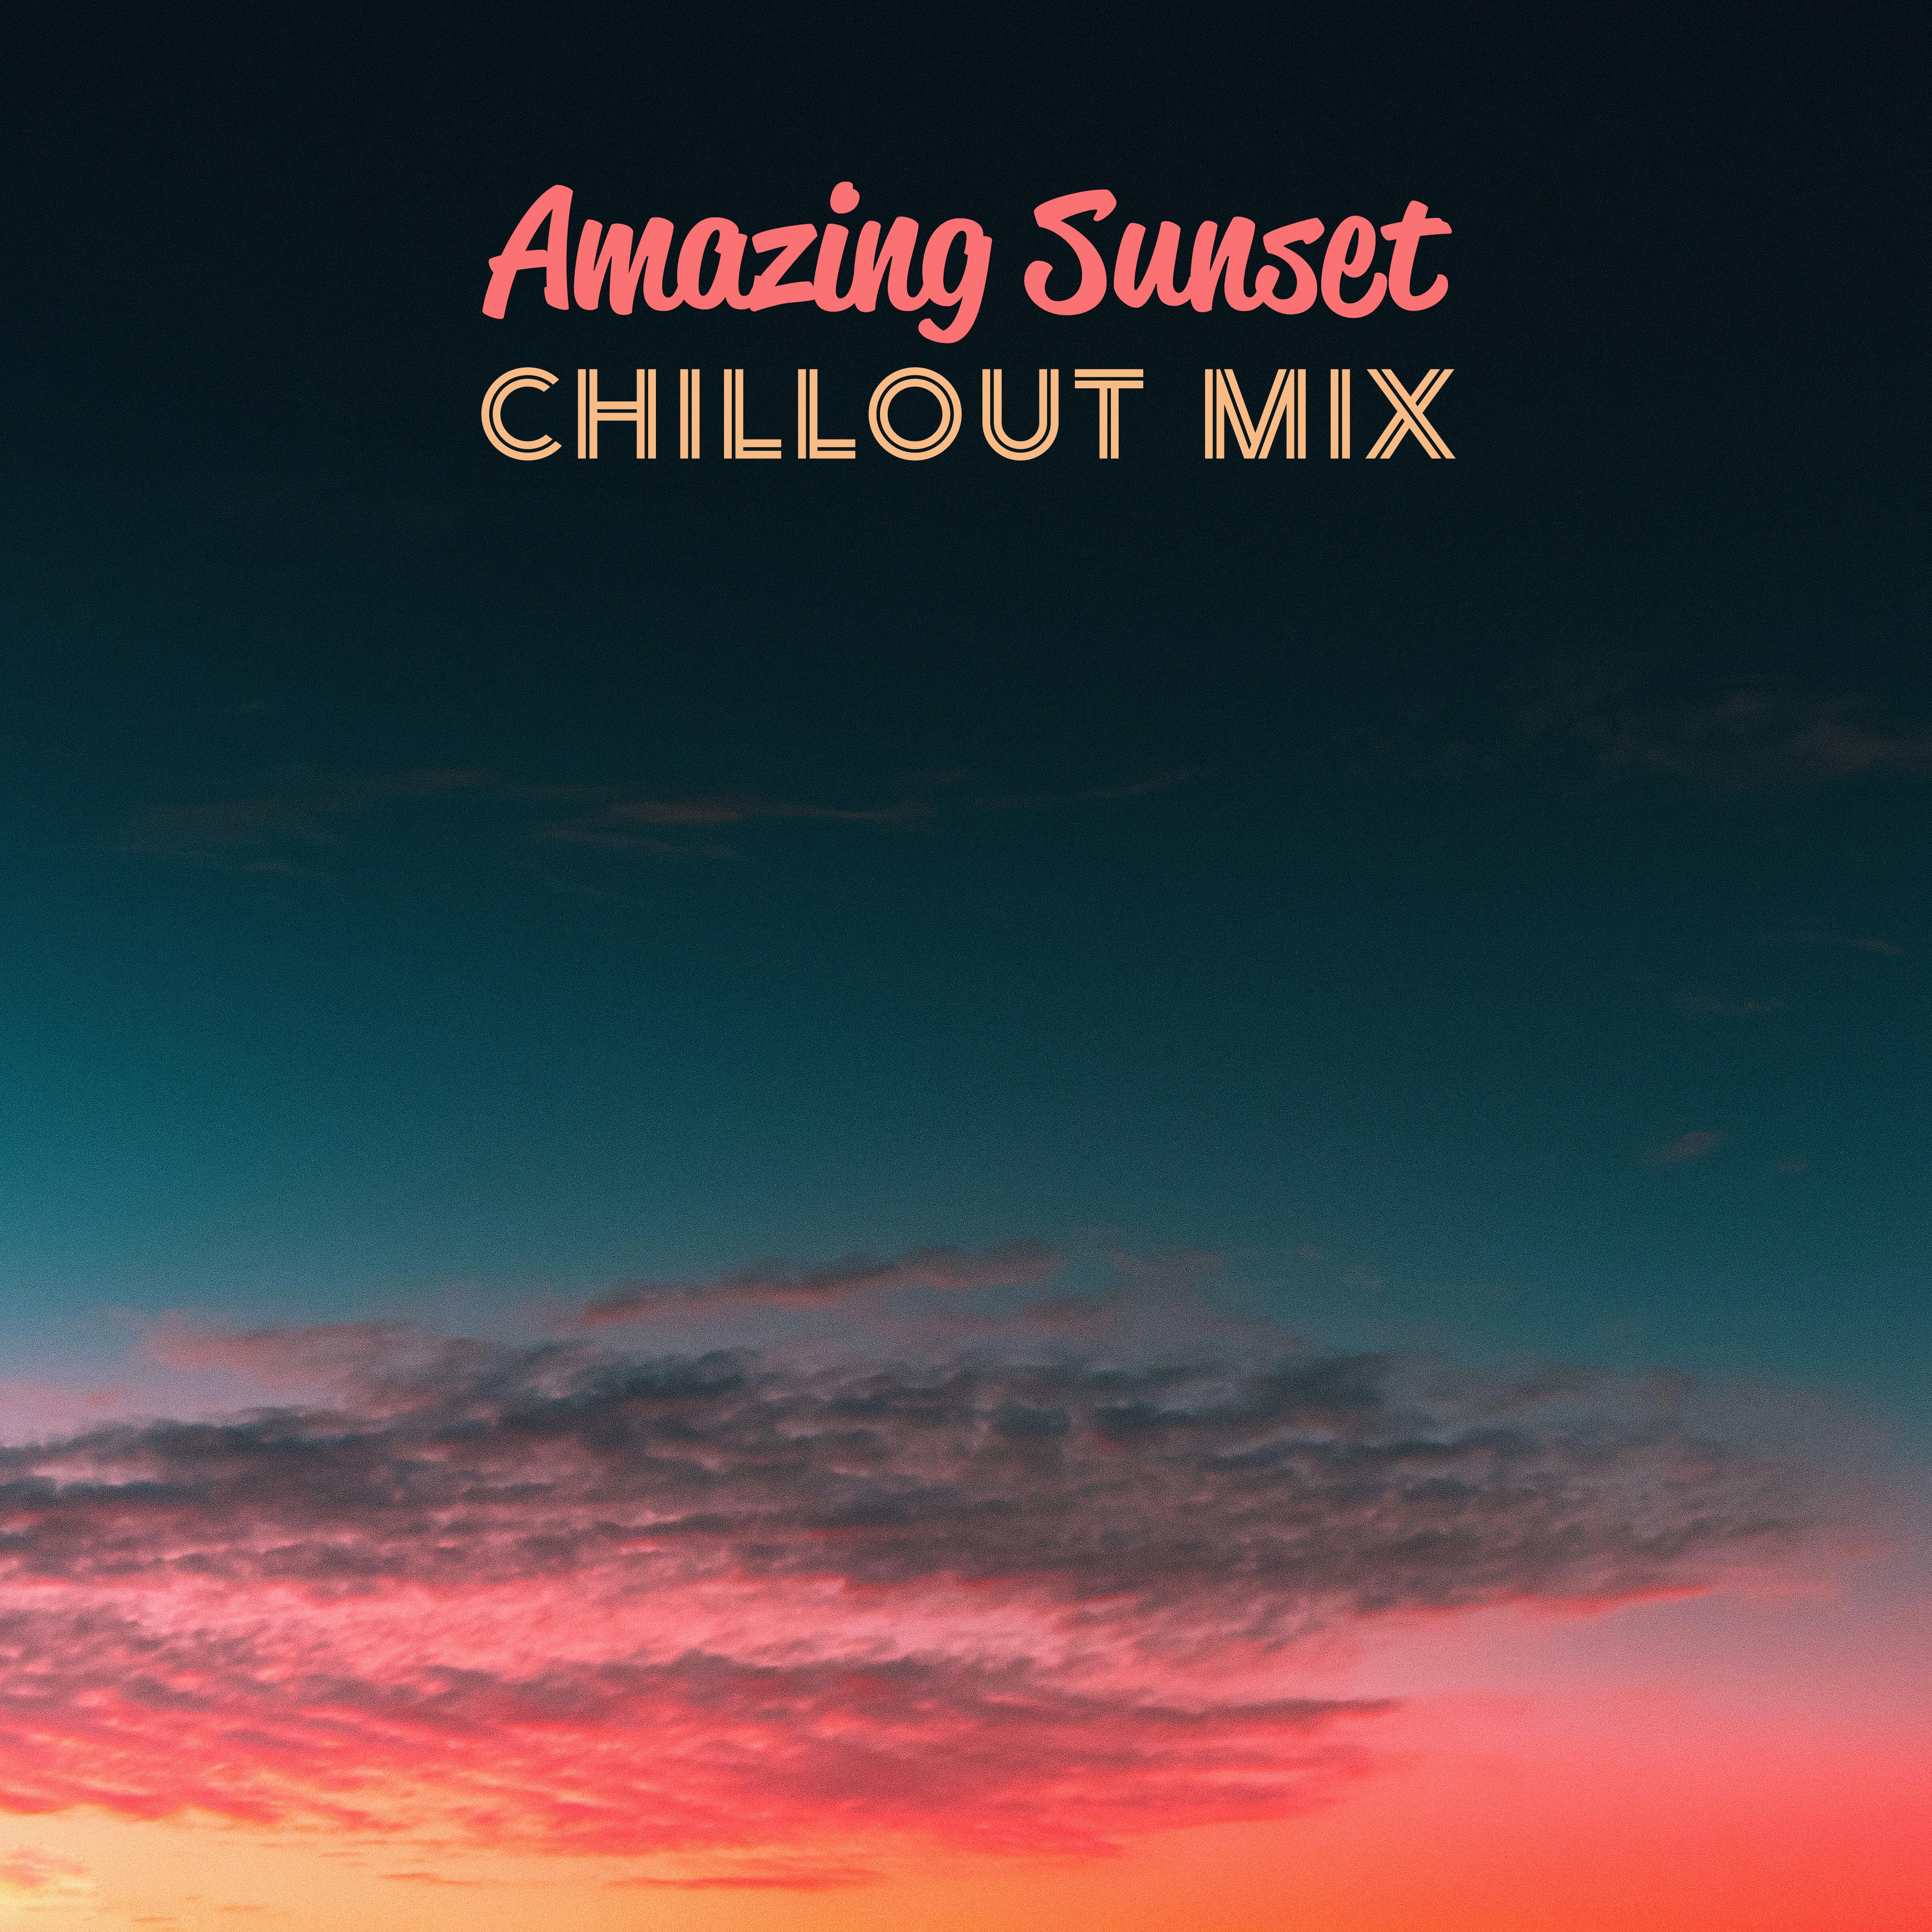 Amazing Sunset Chillout Mix: Best Chill Out 2019 Music Mix, Selection of Top Electronic Slow Beats for Celebrating Summer, Holiday Relaxation, Slow Positive Vibes